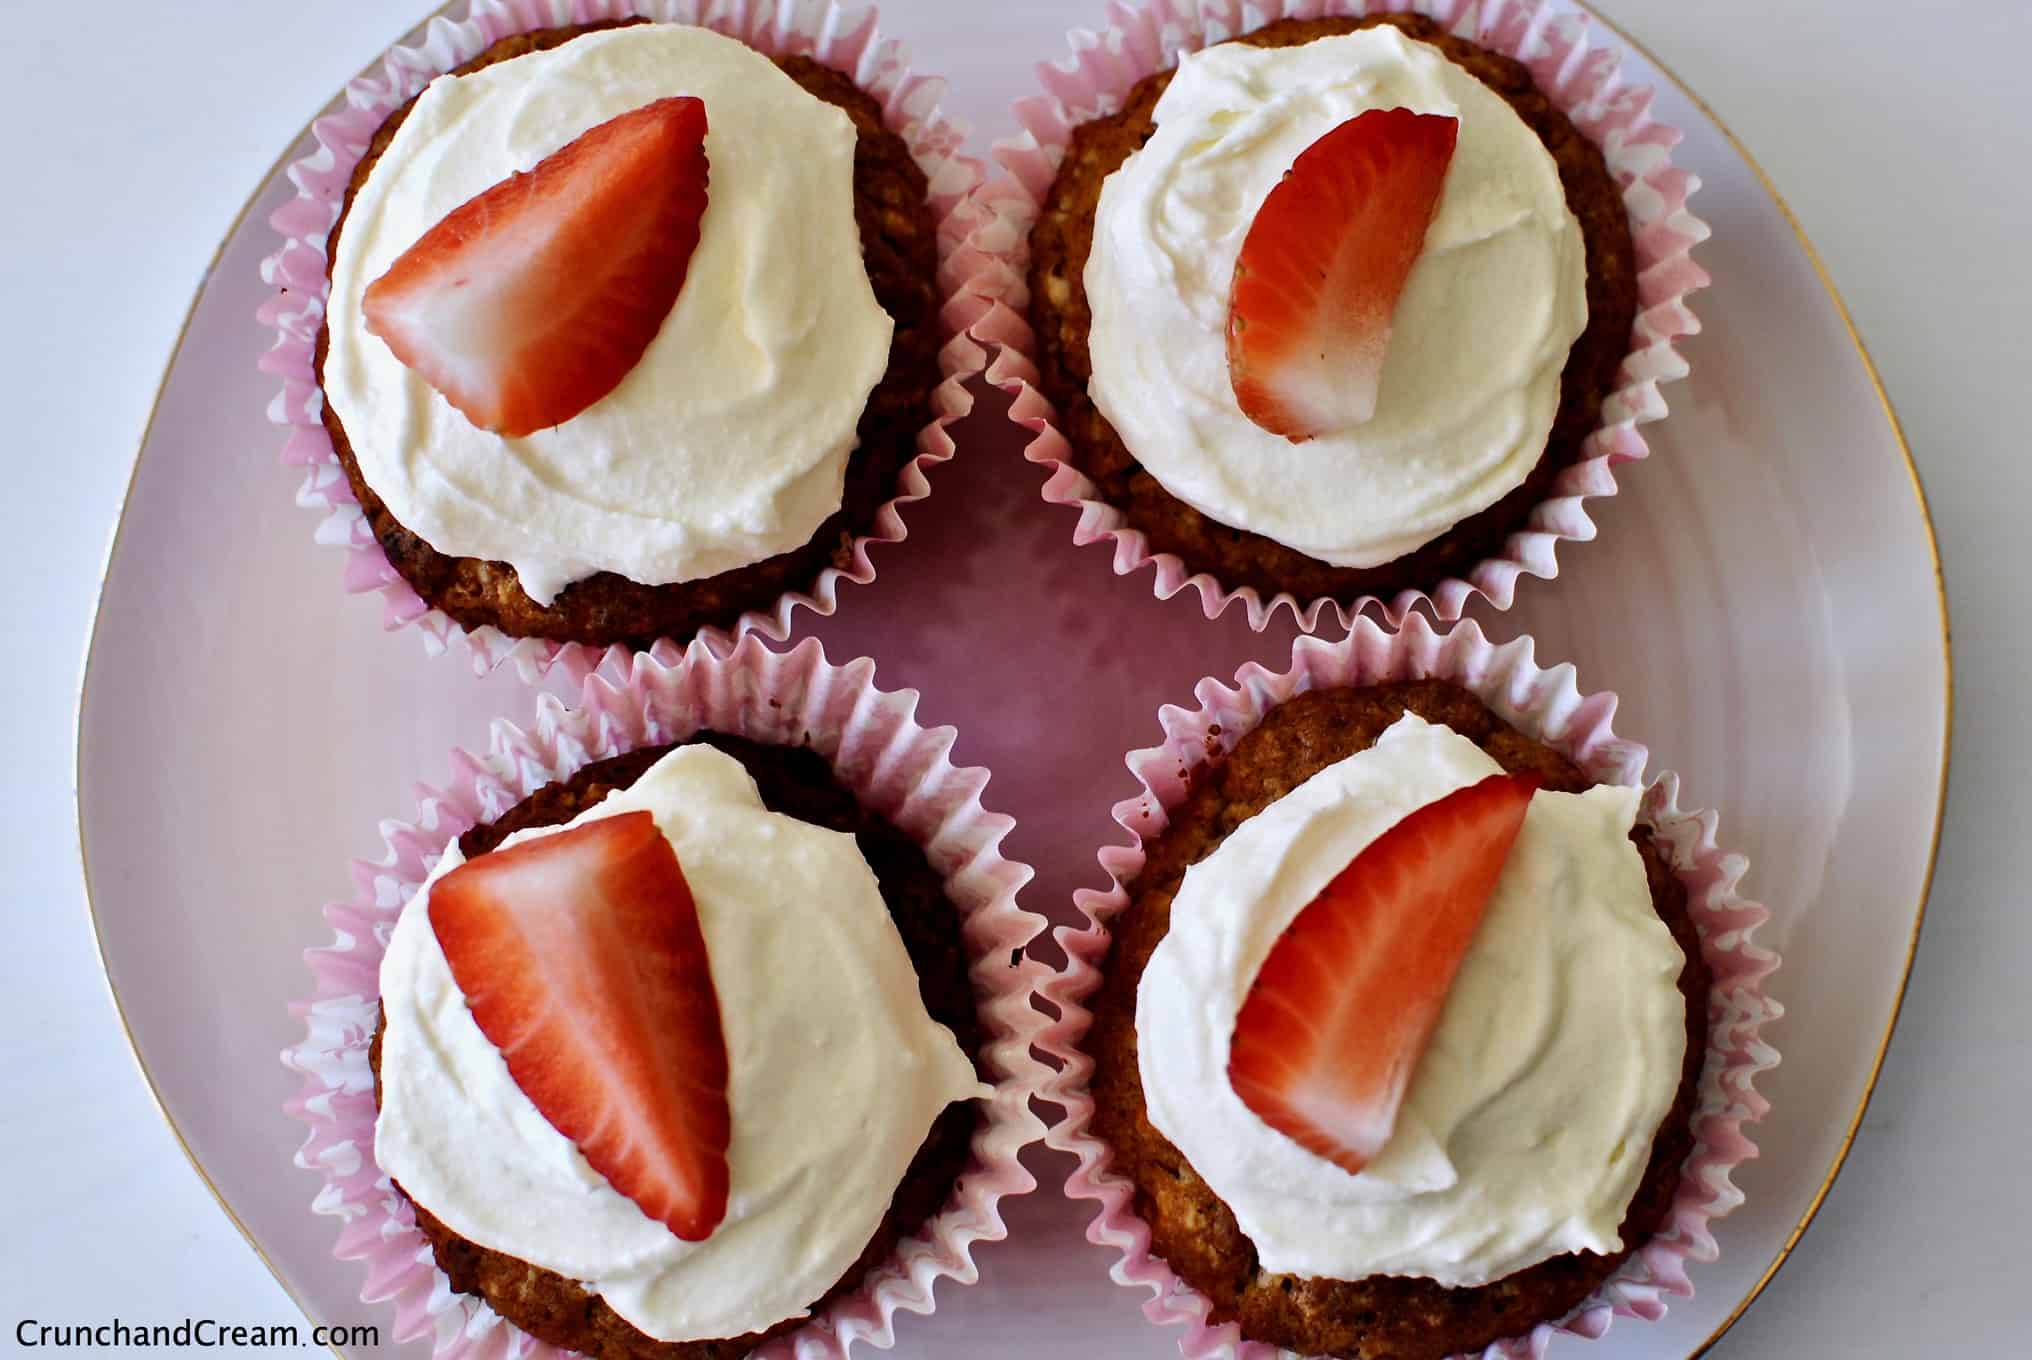 Overhead photo of 4 strawberry cupcakes topped with white chocolate cream cheese frosting and strawberry slices on a pale pink plate.